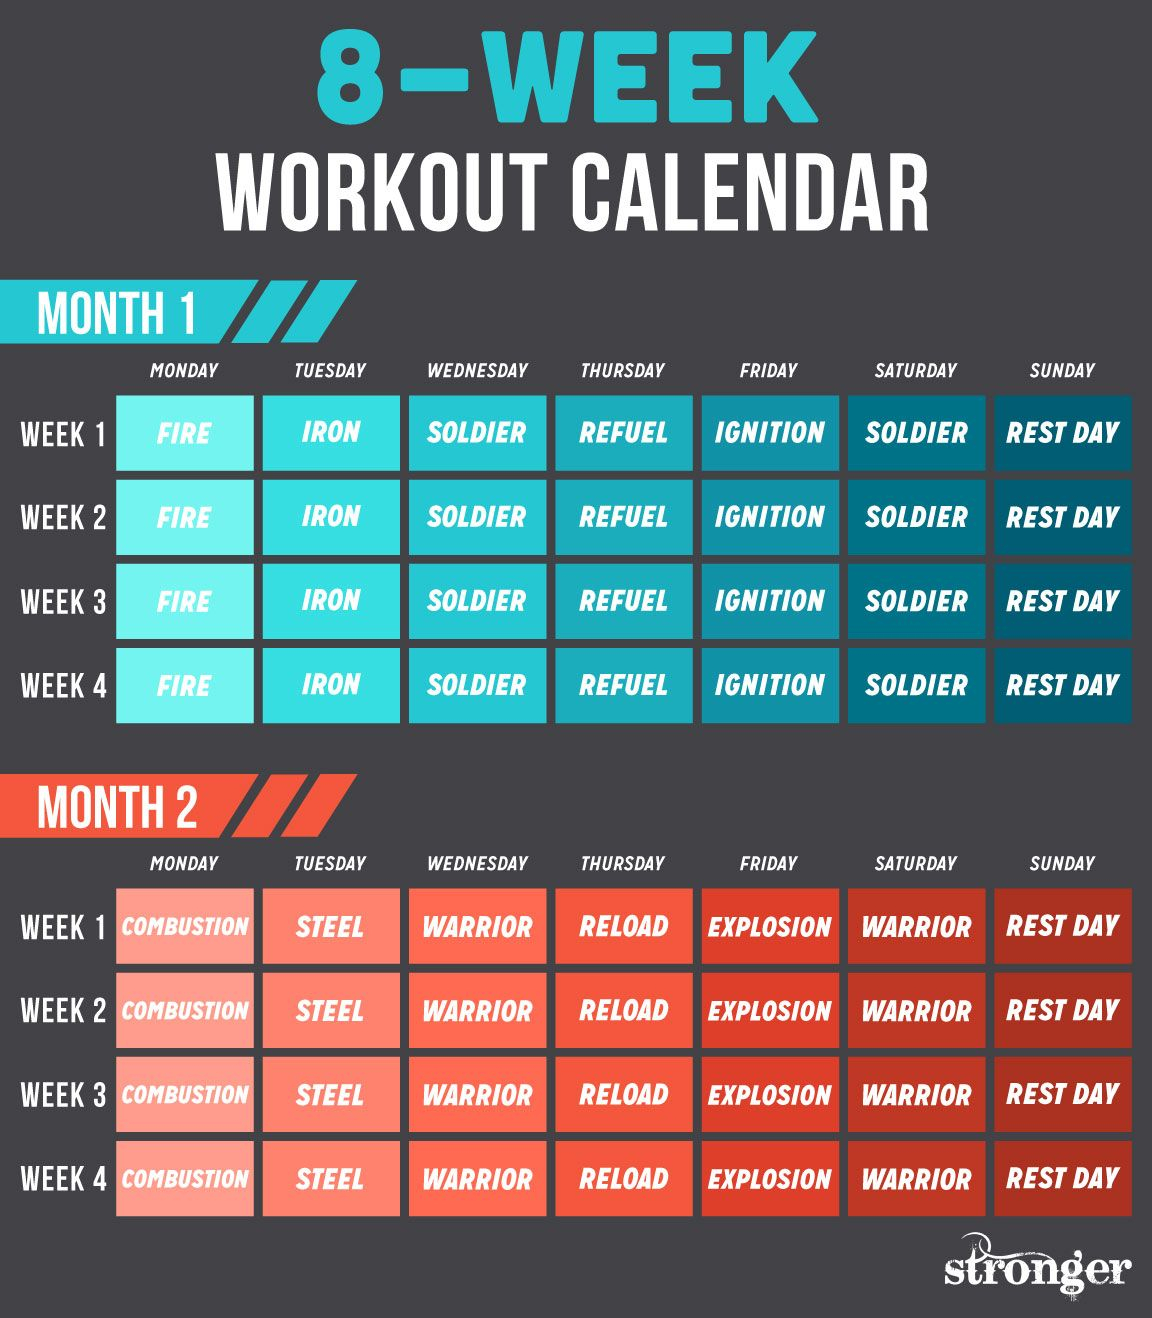 10 Free Workouts To Get You Fitter And Stronger | Workout